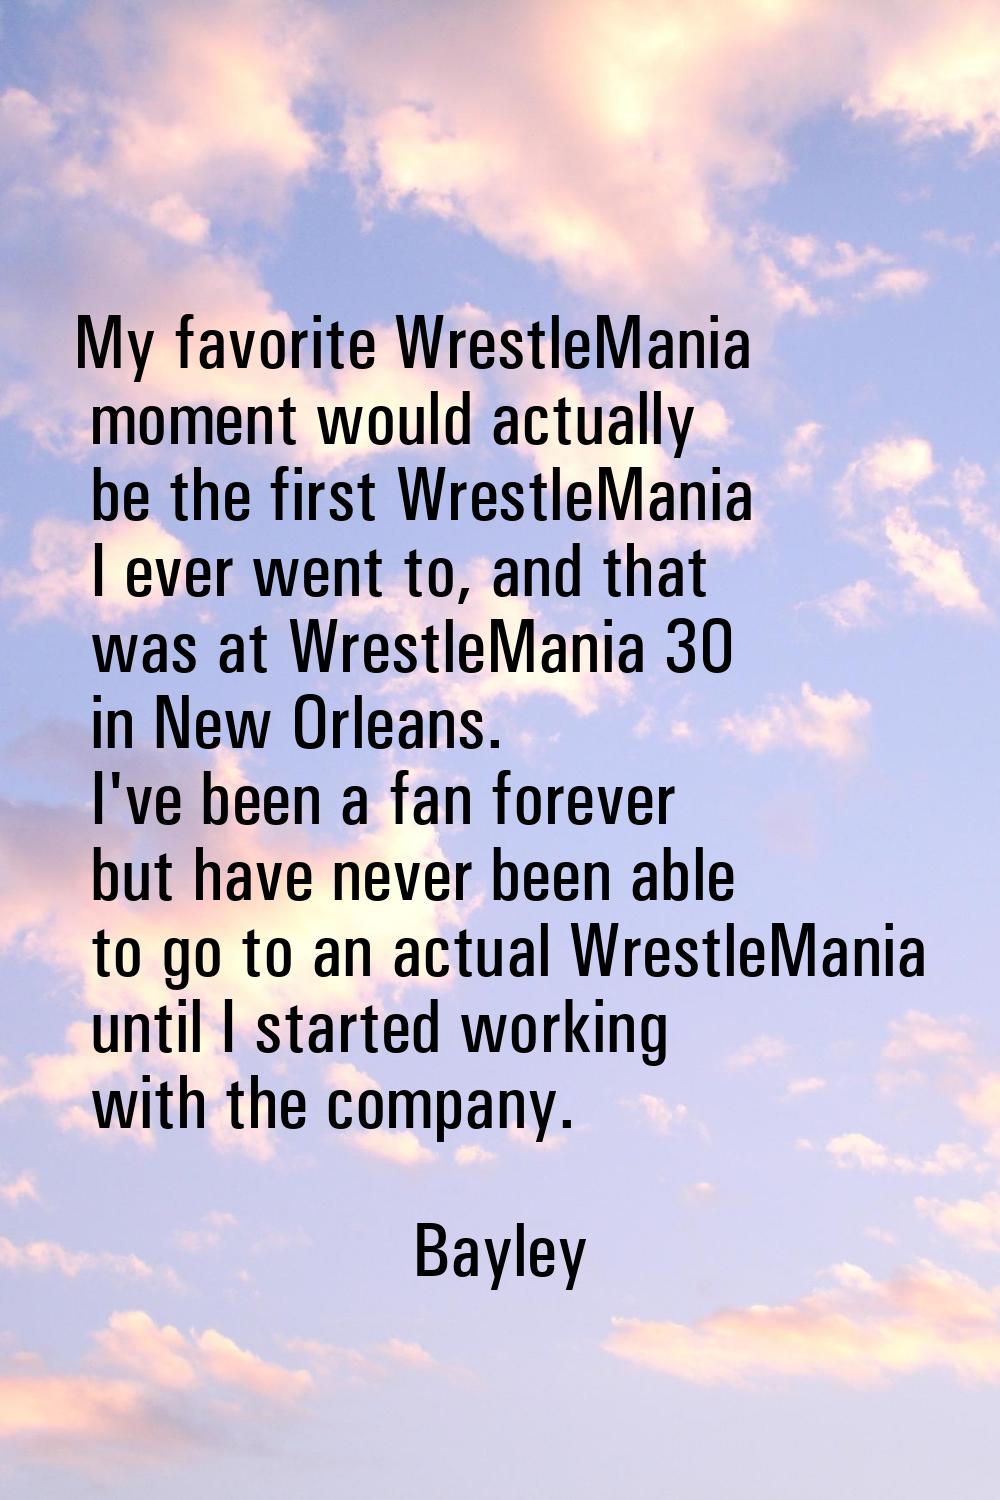 My favorite WrestleMania moment would actually be the first WrestleMania I ever went to, and that w